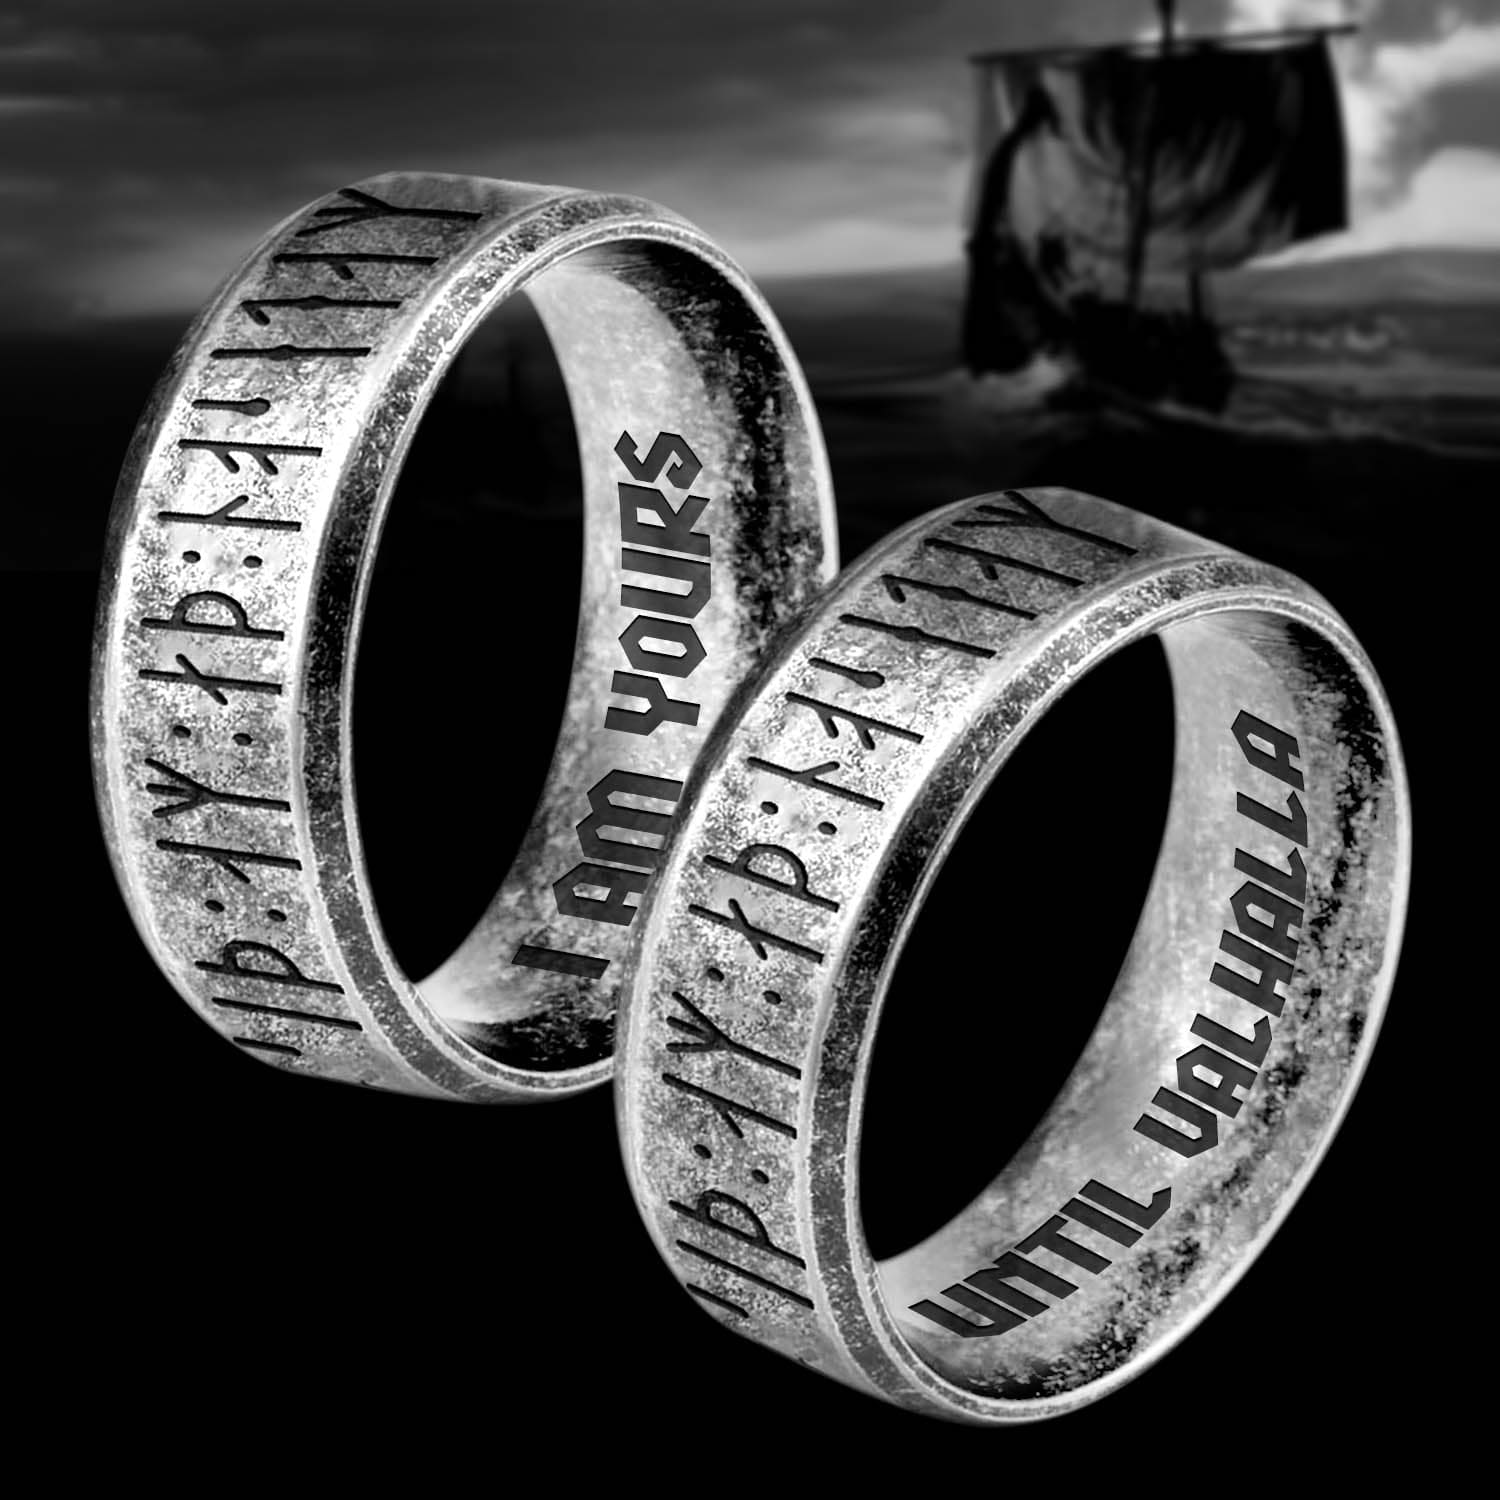 Couple Rune Ring Necklaces - Viking - To My Future Wife - I Am Yours Until Valhalla  - Gndx14005